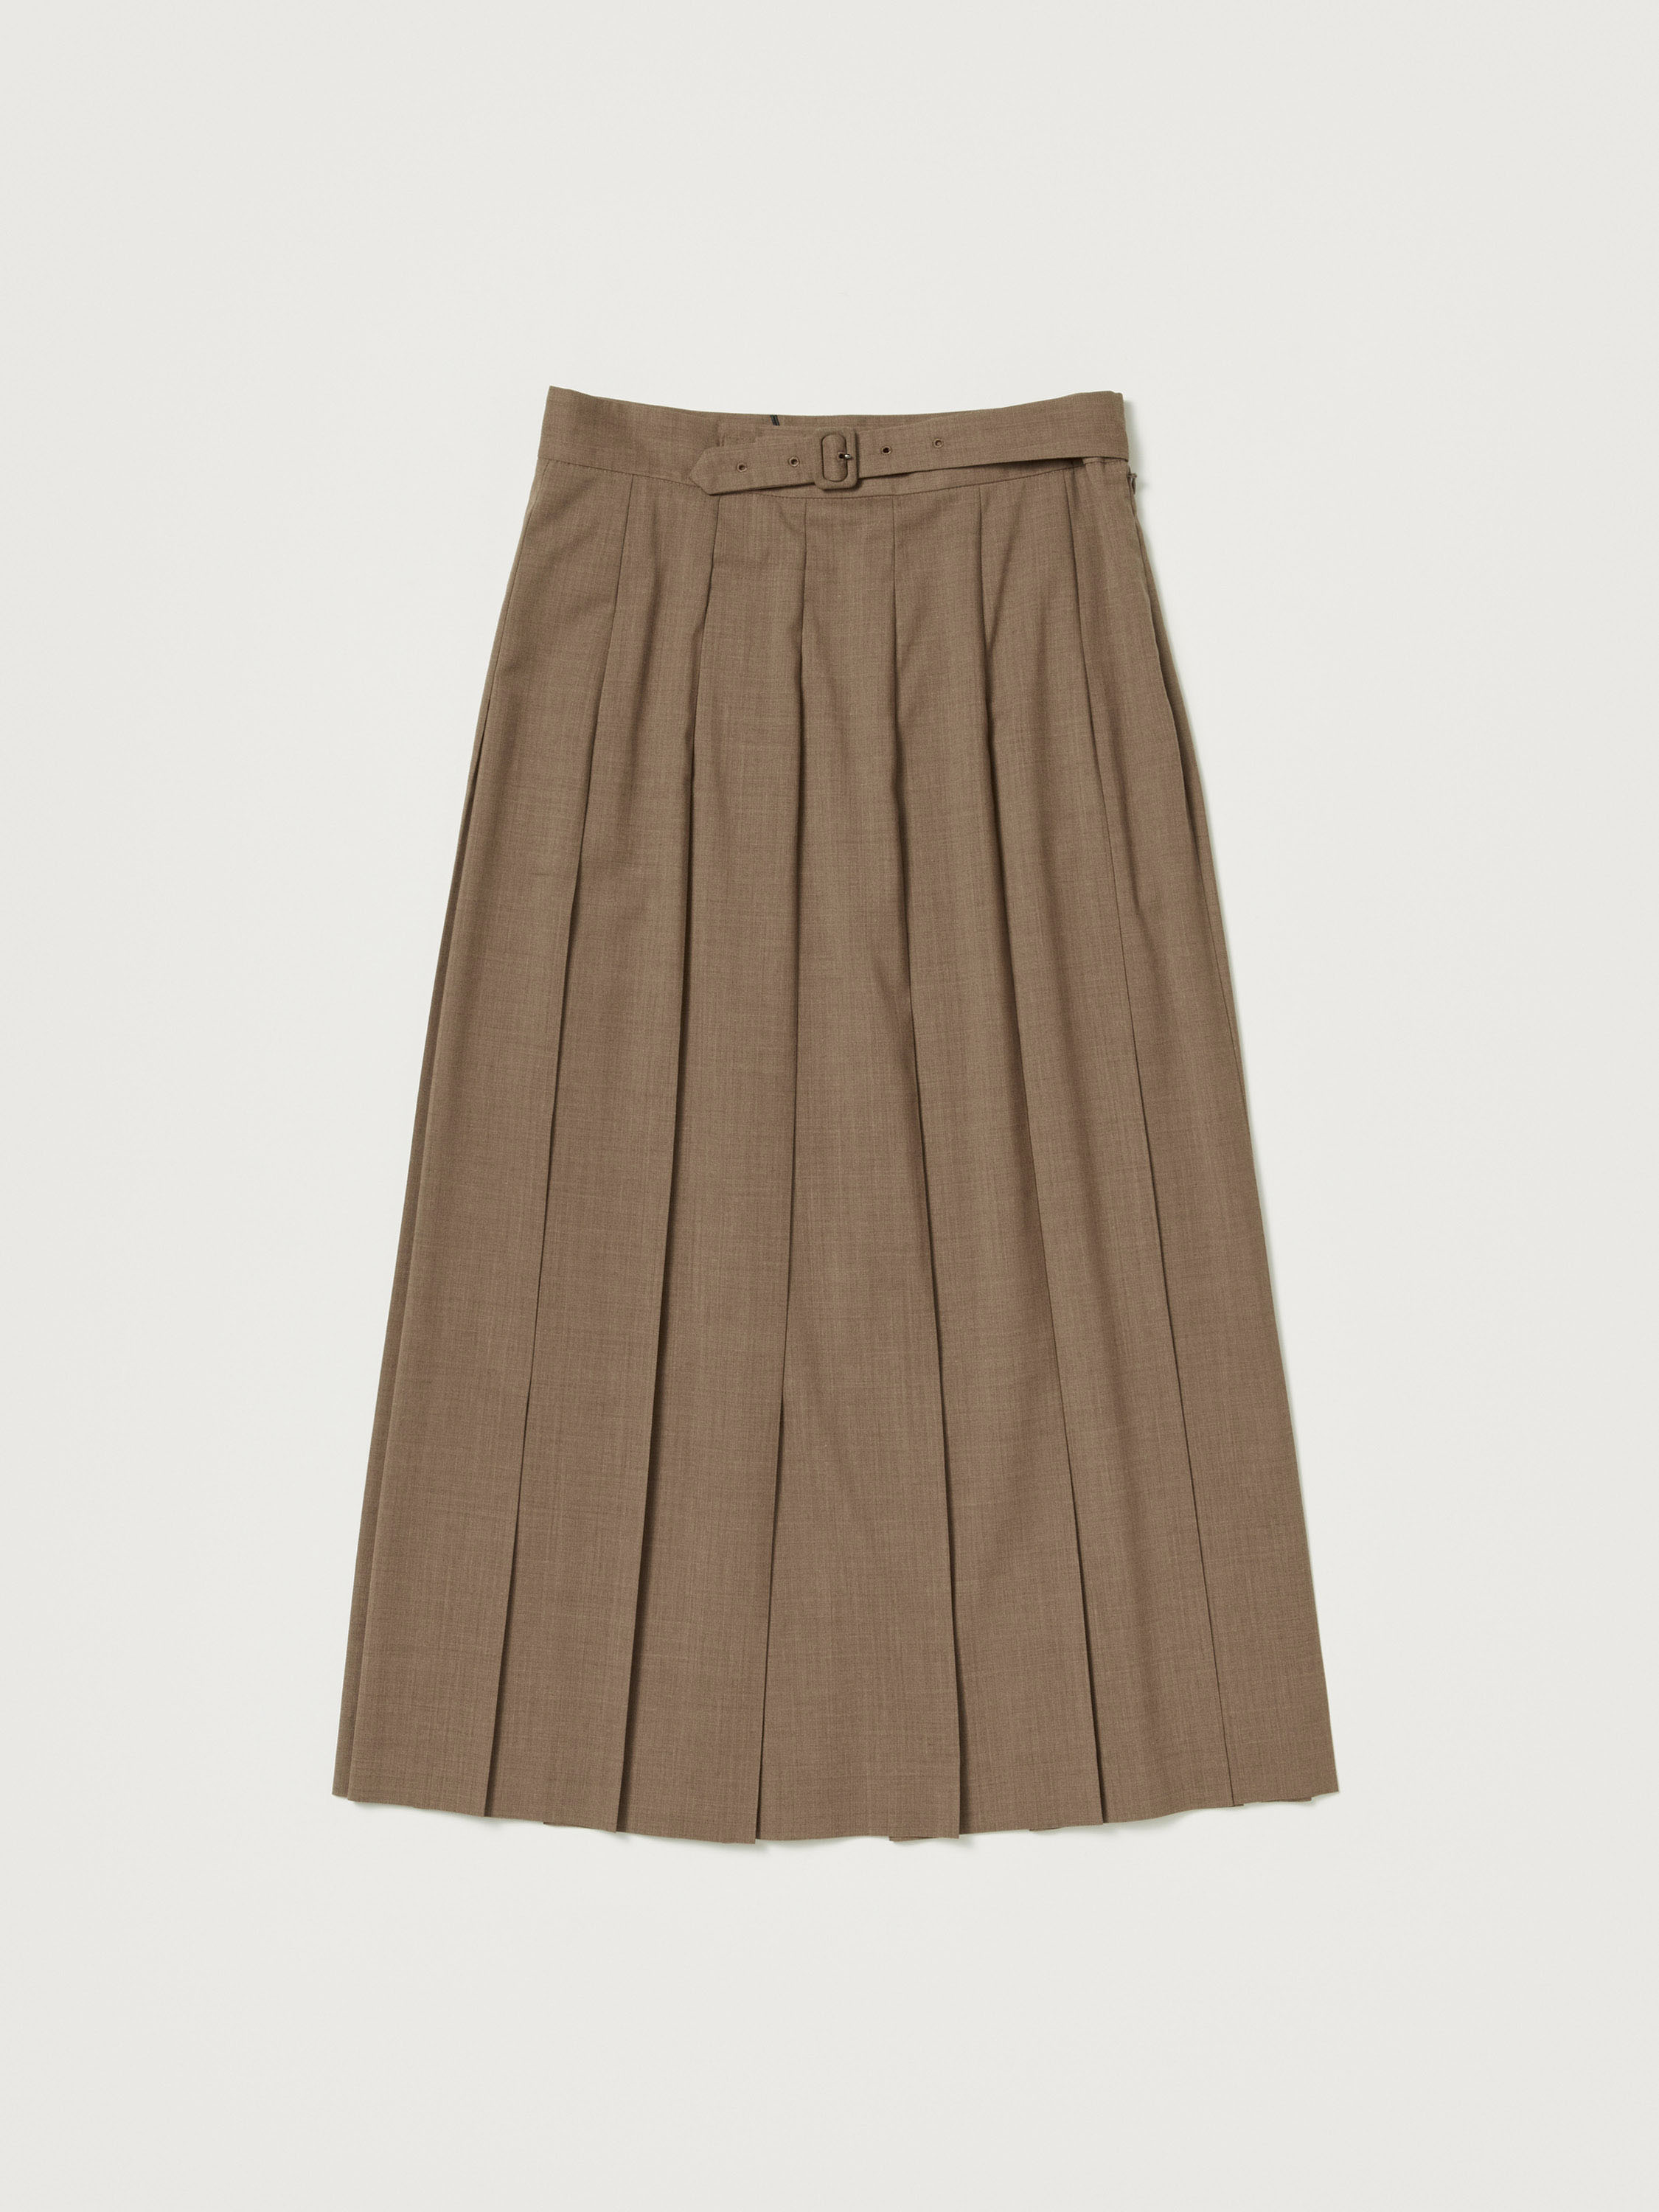 SUPER FINE TROPICAL WOOL PLEATED SKIRT 詳細画像 TOP BROWN 5